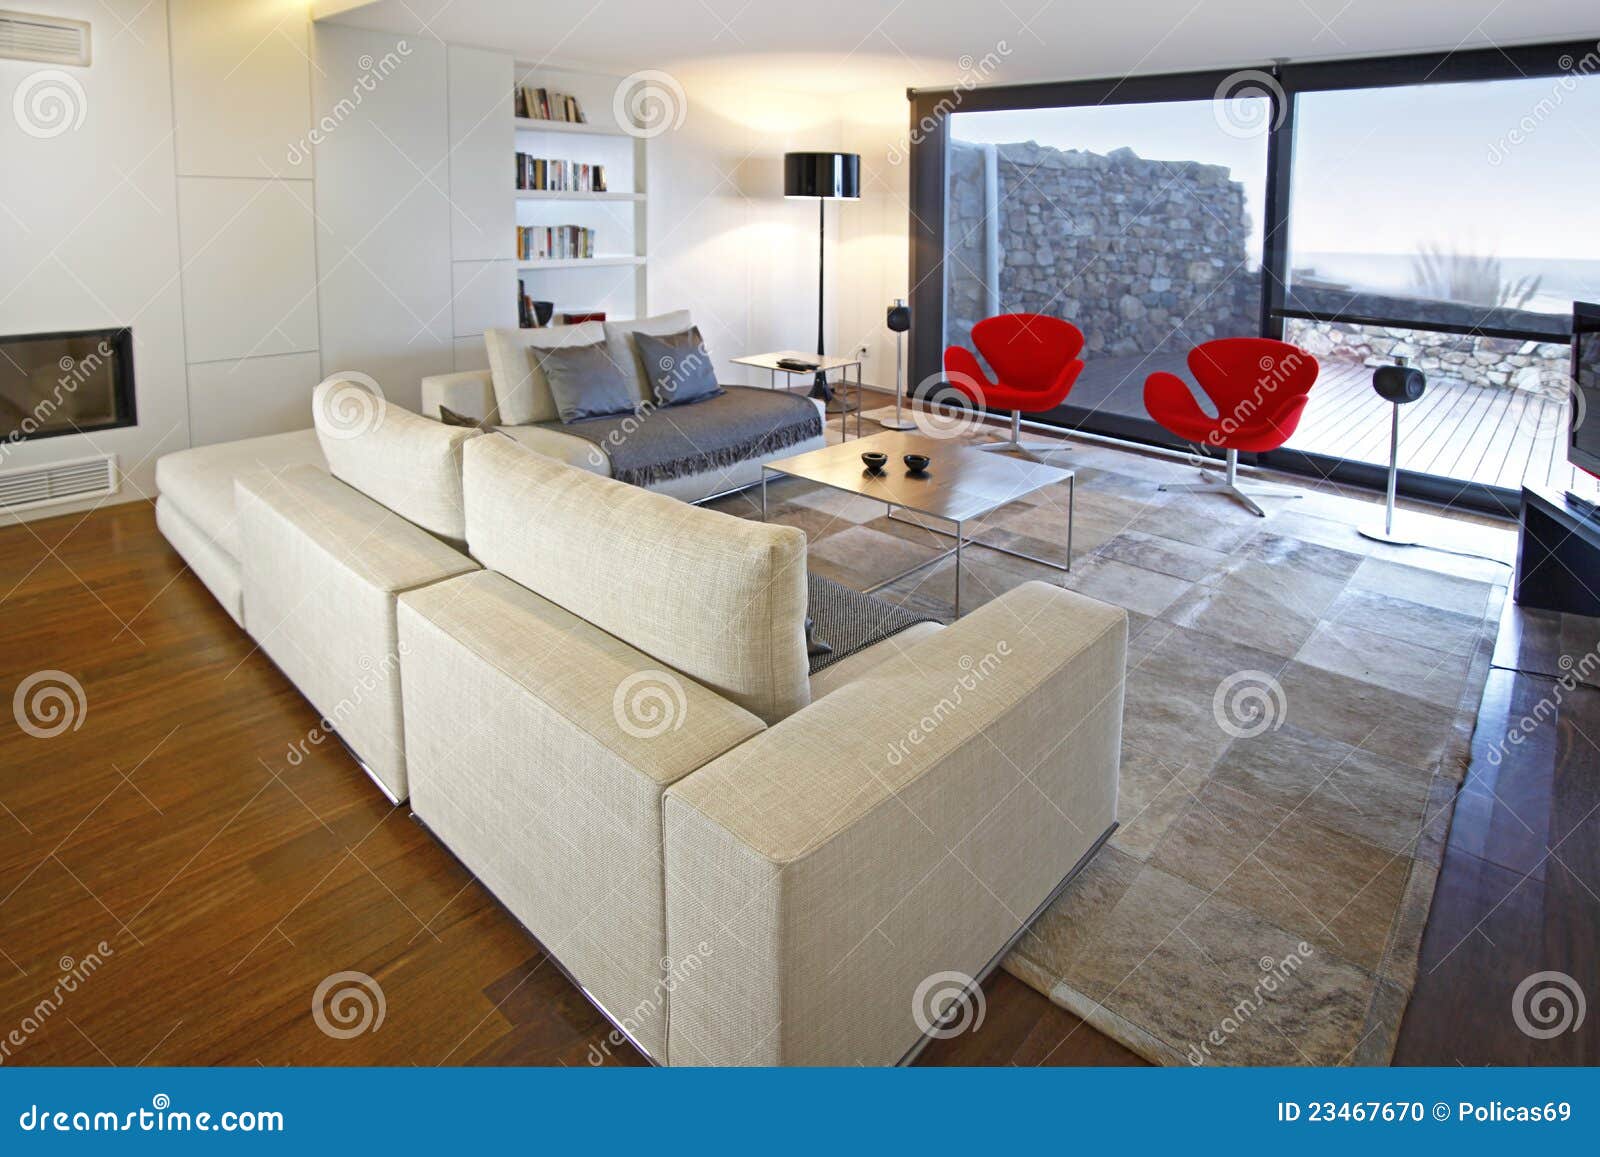 Modern house interior stock photo. Image of ambiance - 23467670